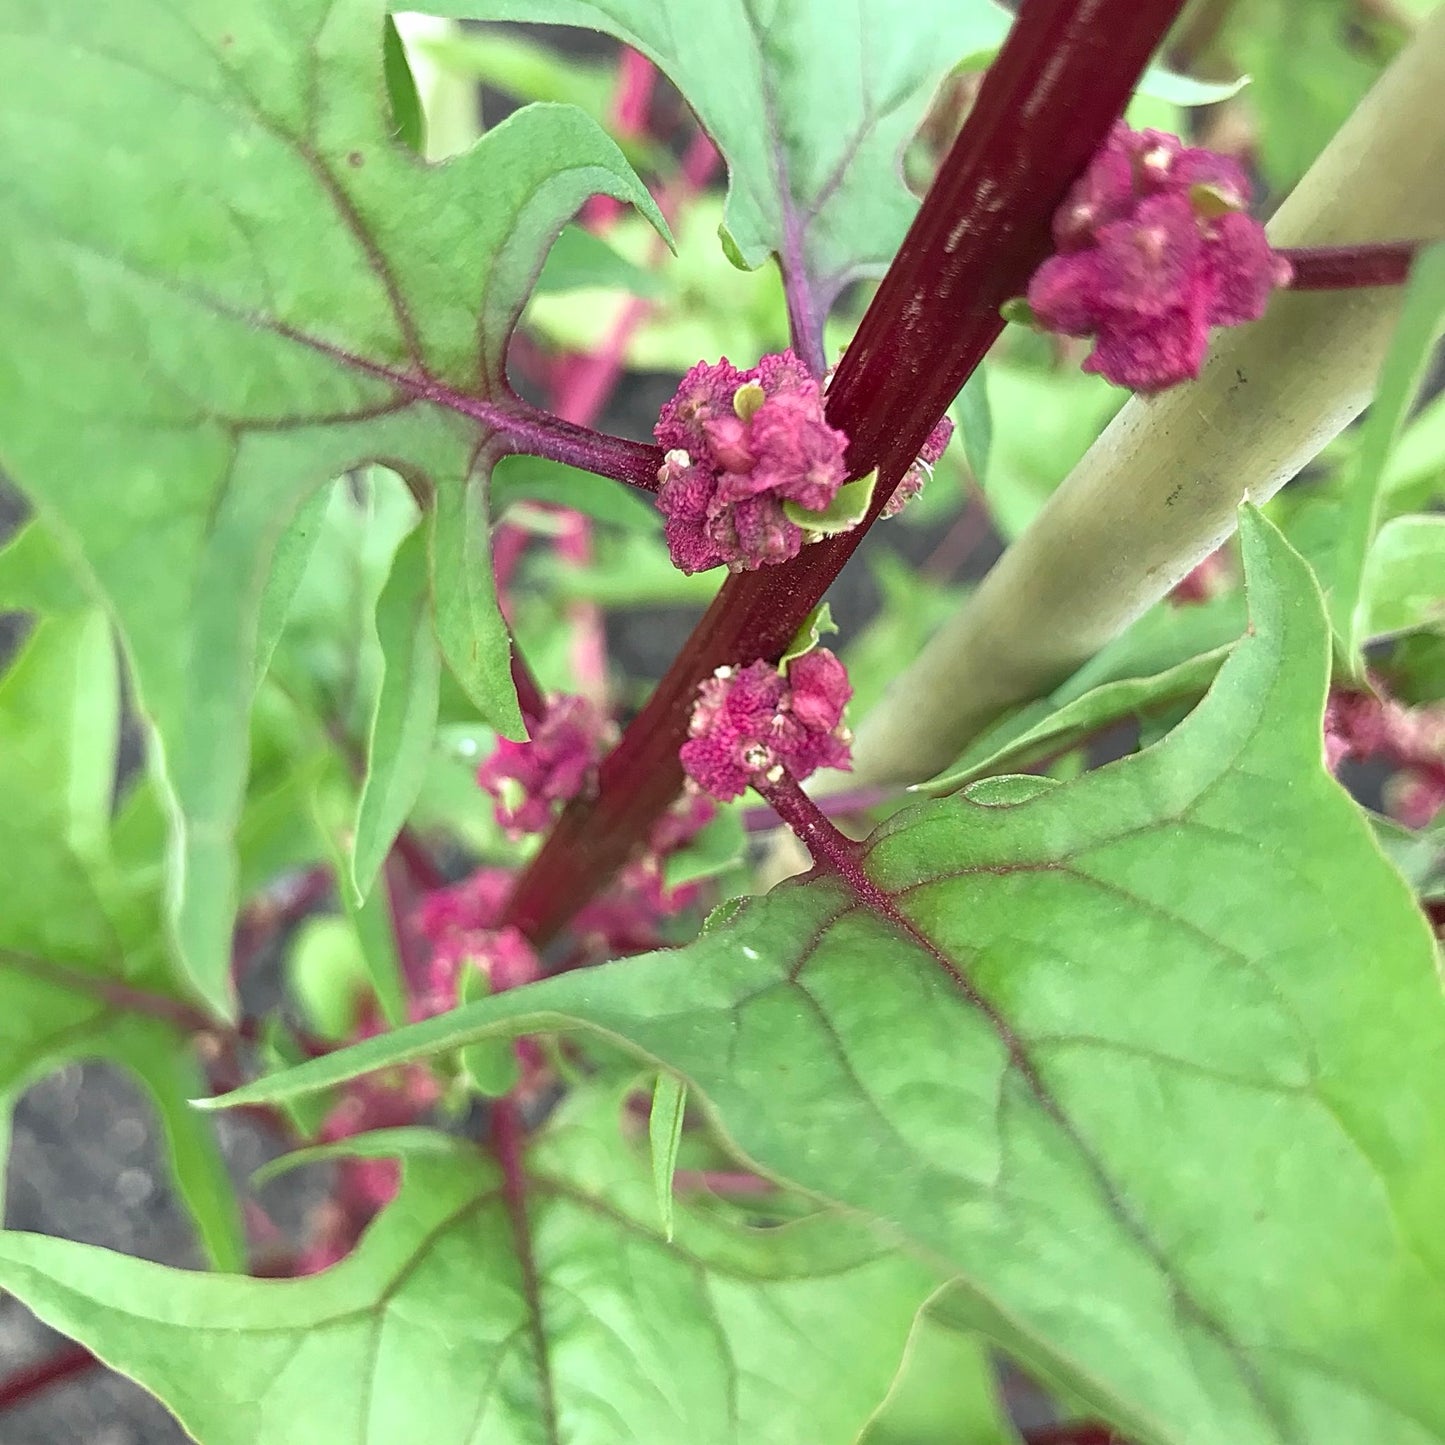 Magenta seeds on the red stem of a spinach plant.